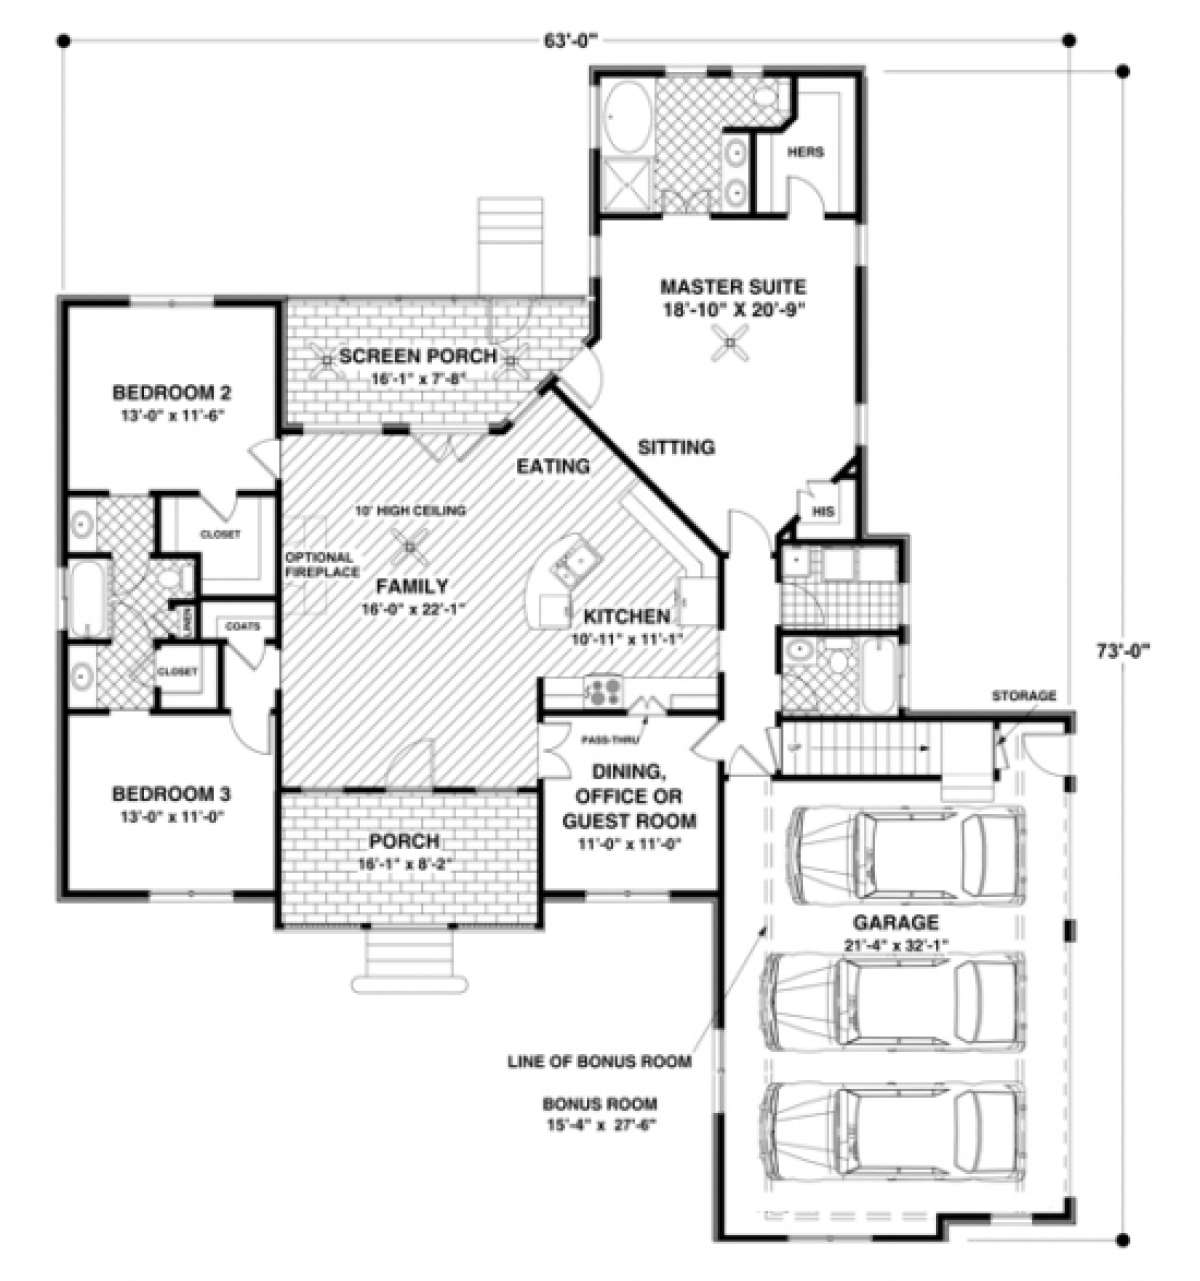 Traditional Plan: 1,800 Square Feet, 3-4 Bedrooms, 3 Bathrooms - 036-00062